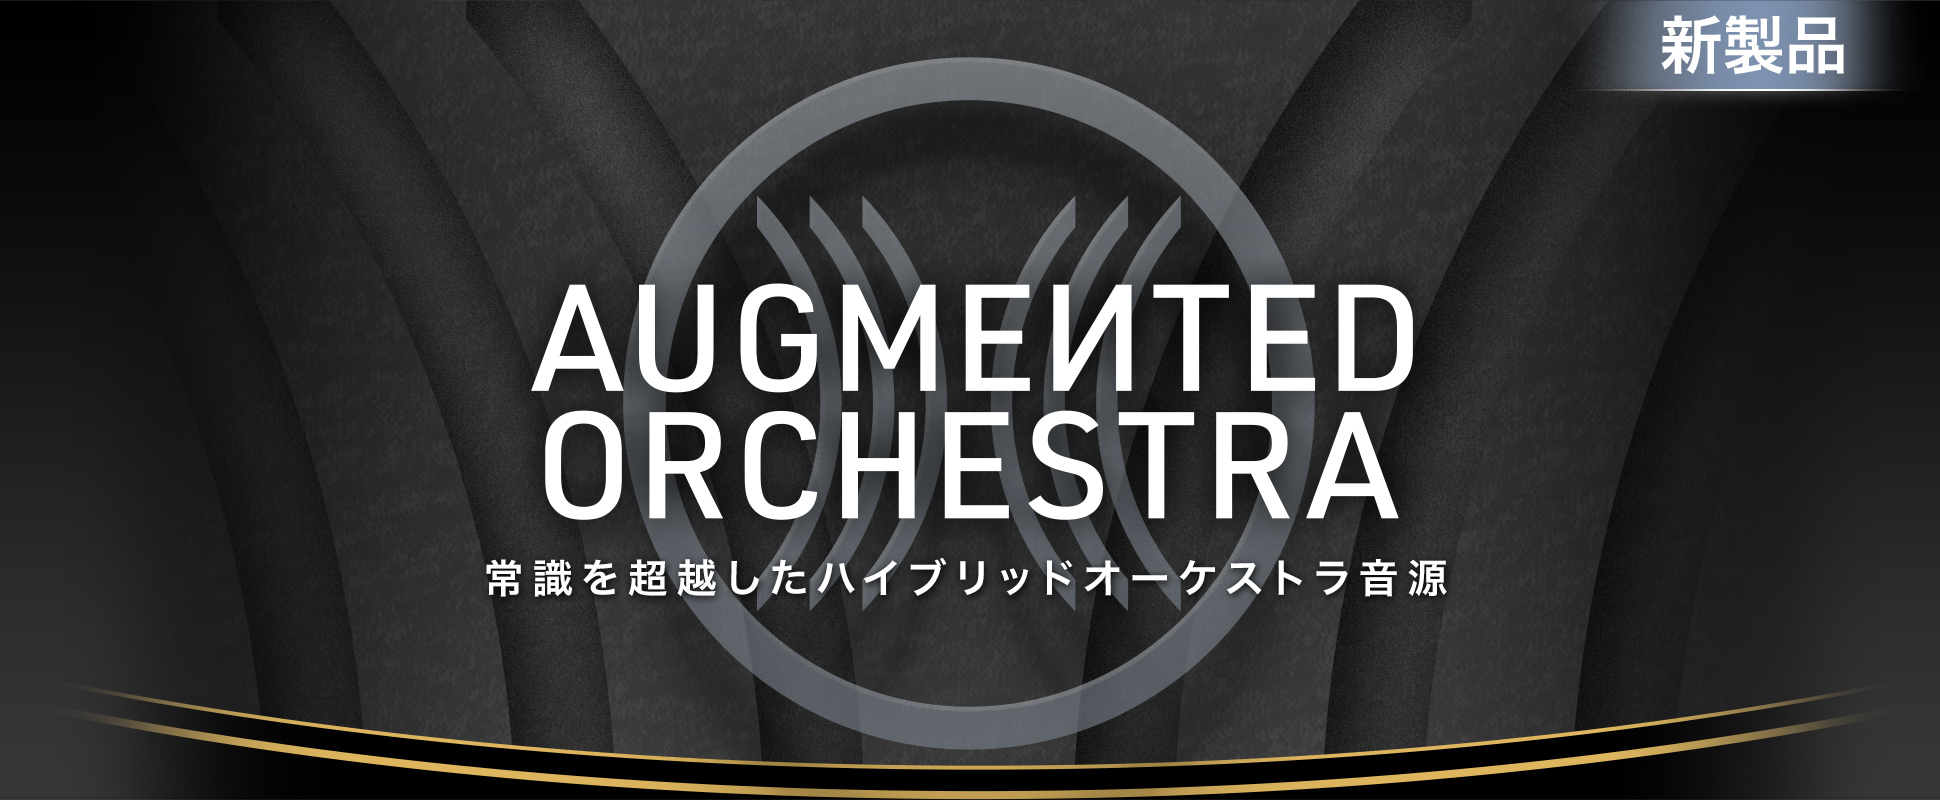 Augmented Orchestra